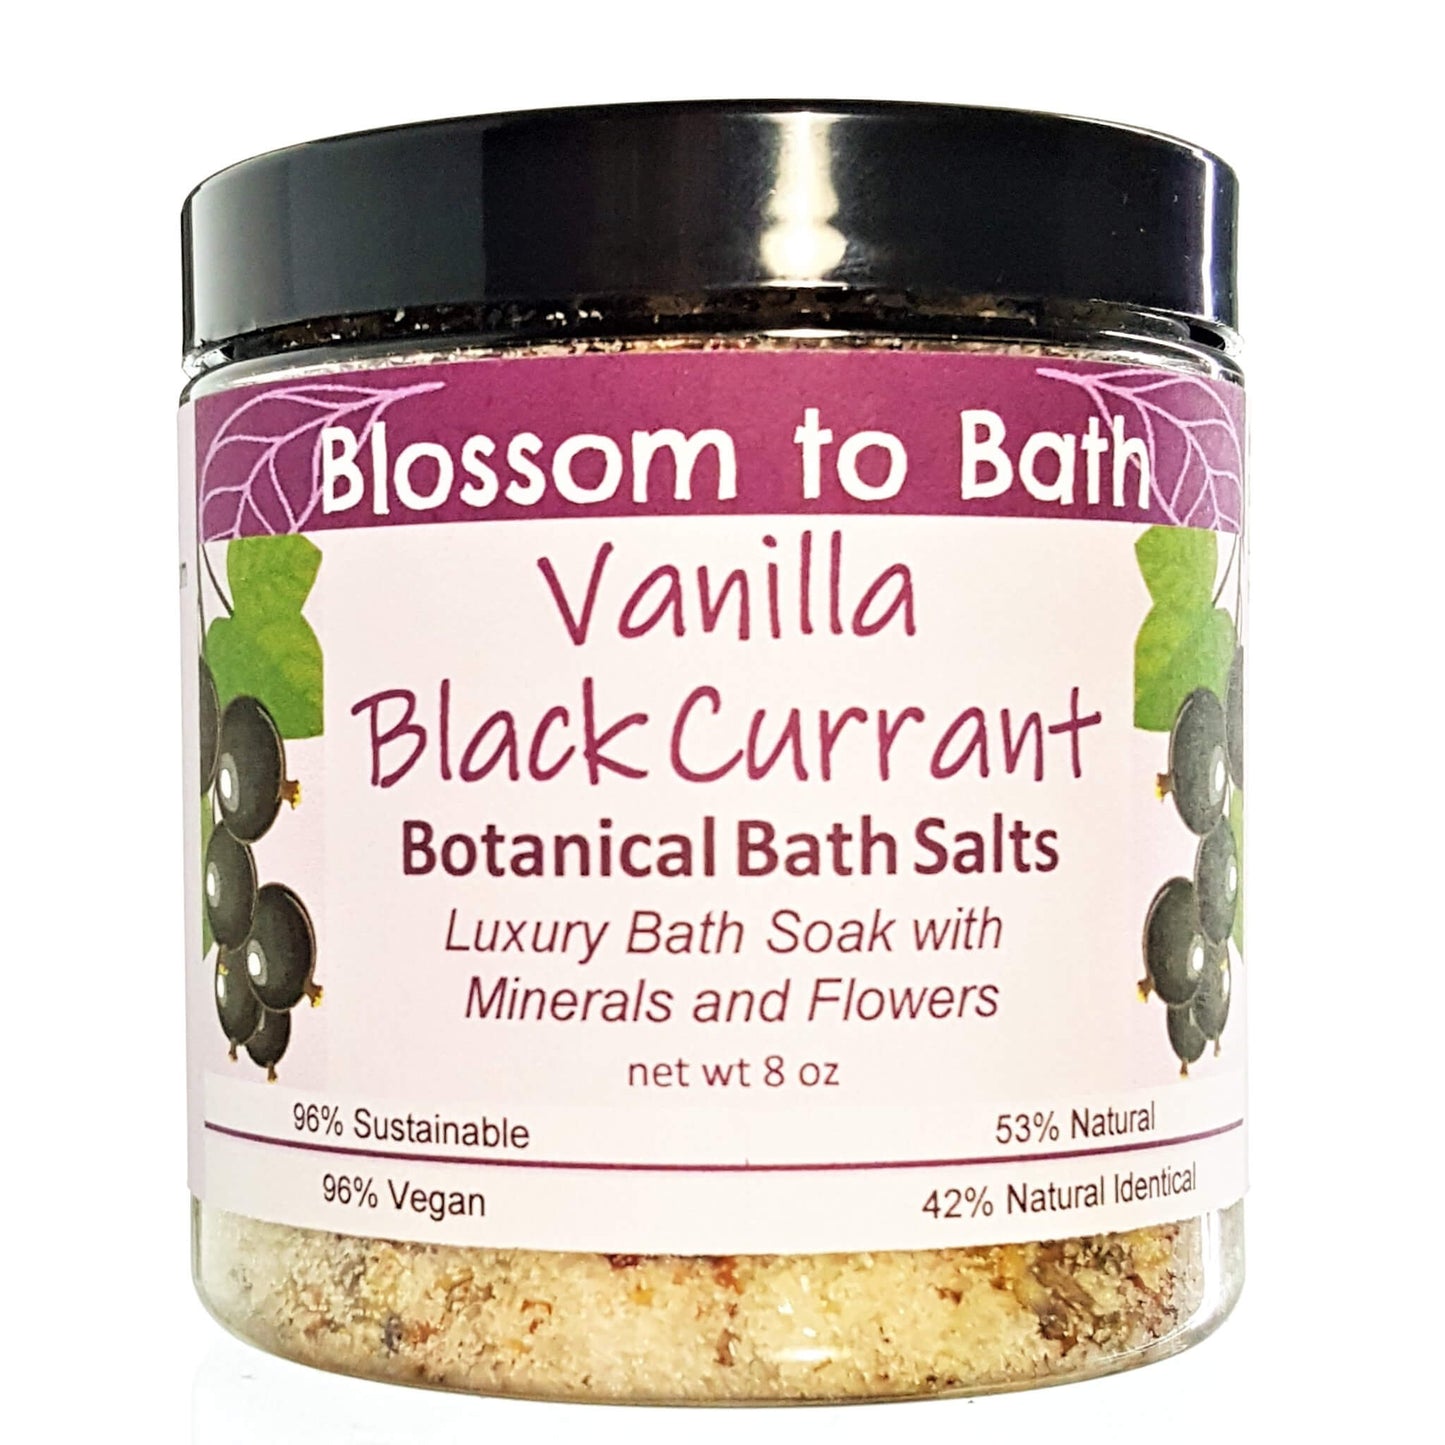 Buy Blossom to Bath Vanilla Black Currant Botanical Bath Salts from Flowersong Soap Studio.  A hand selected variety of skin loving botanicals and mineral rich salts for a unique, luxurious soaking experience  A sensuous rich berry scent with a hint of vanilla and a twist of freshness.